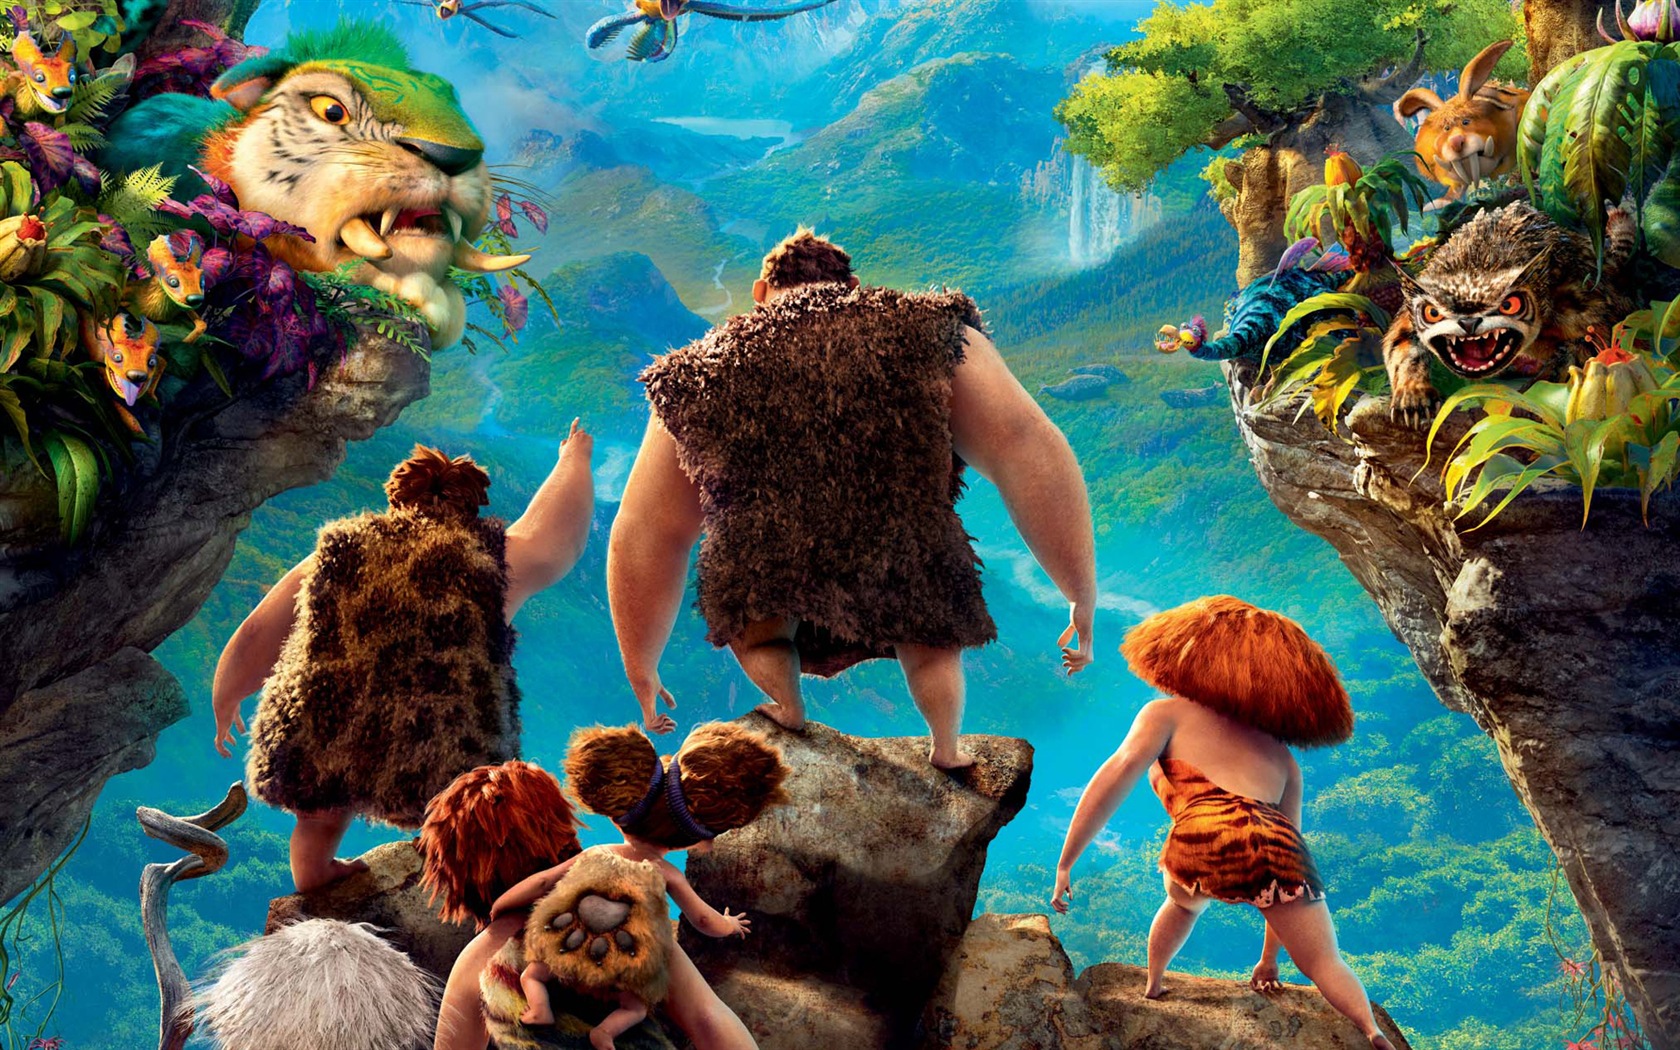 The Croods HD movie wallpapers #5 - 1680x1050